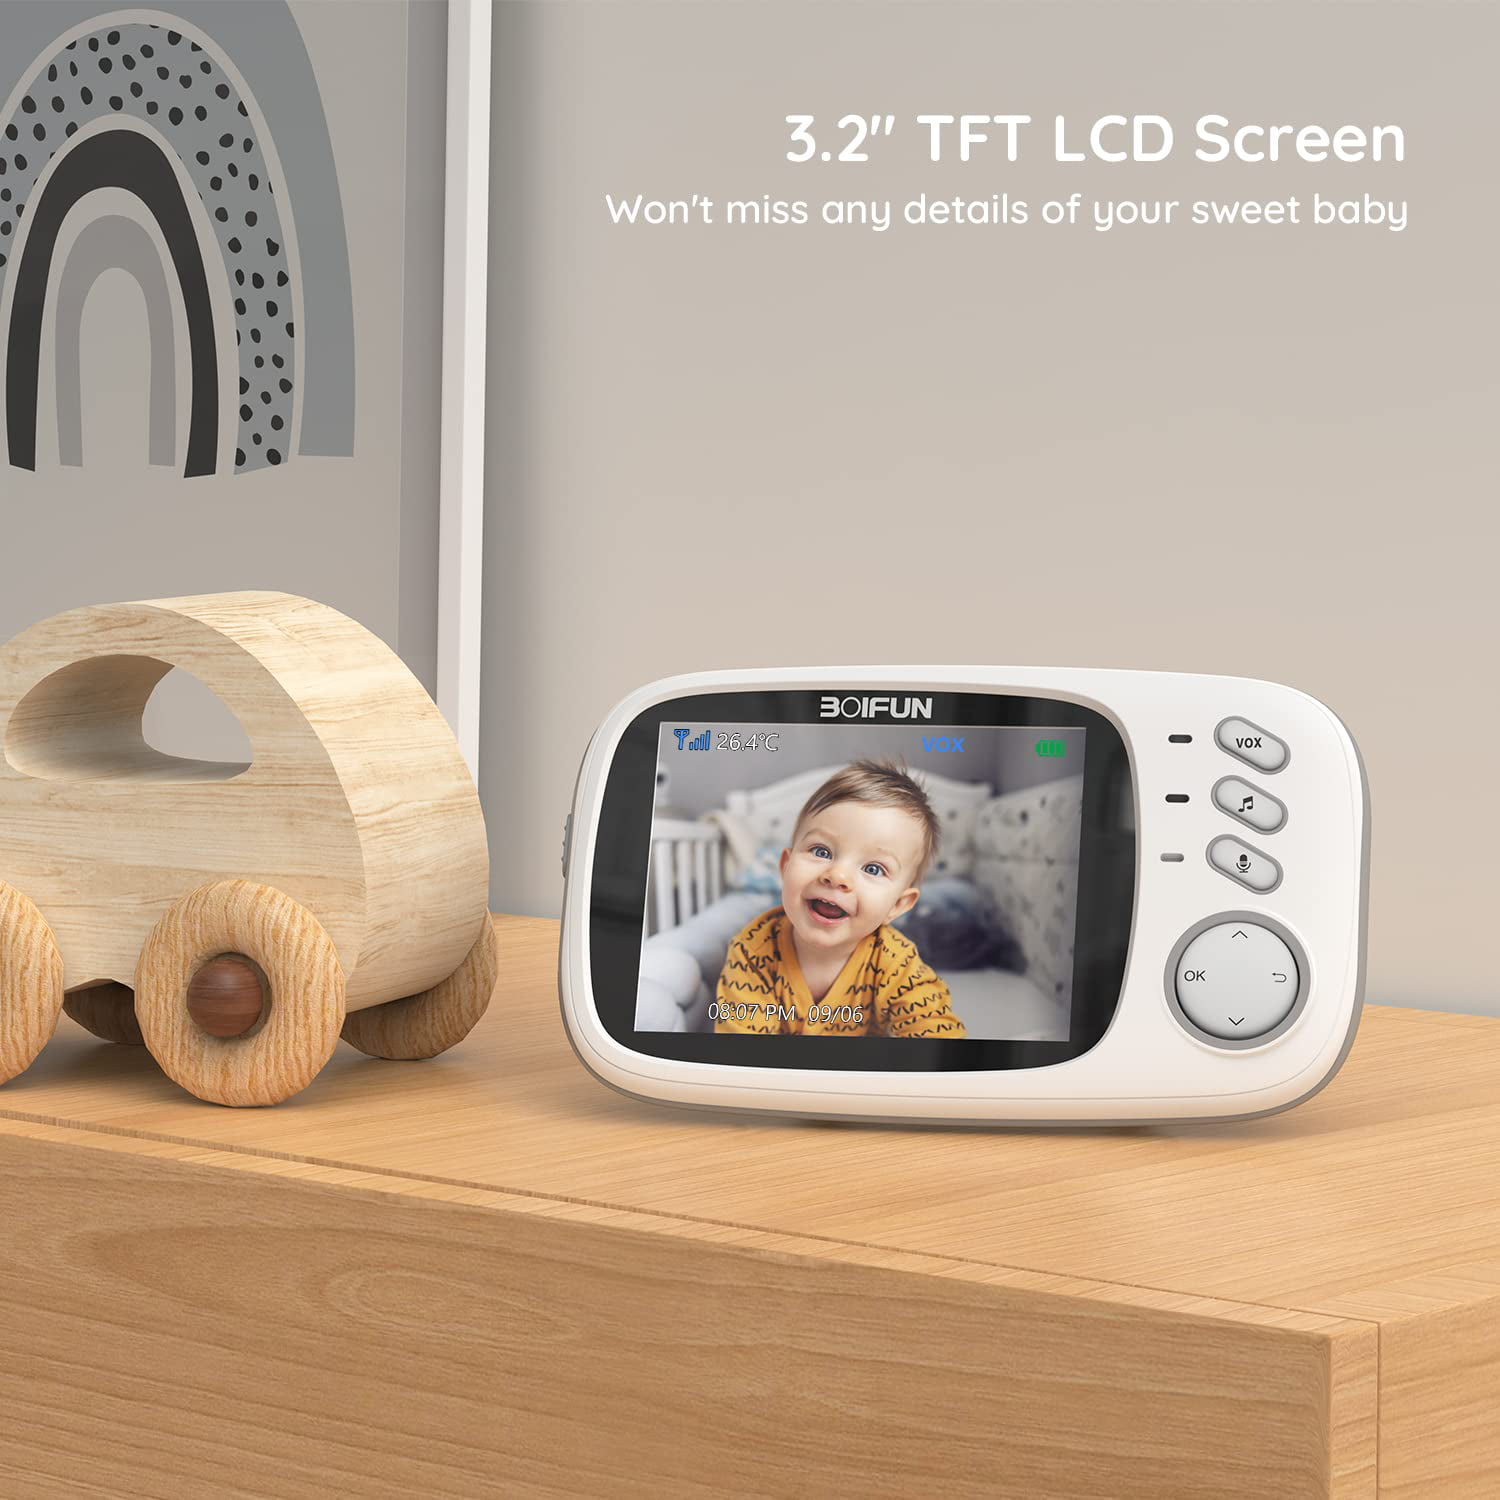 How to Connect Display to Boifun Baby Monitor 